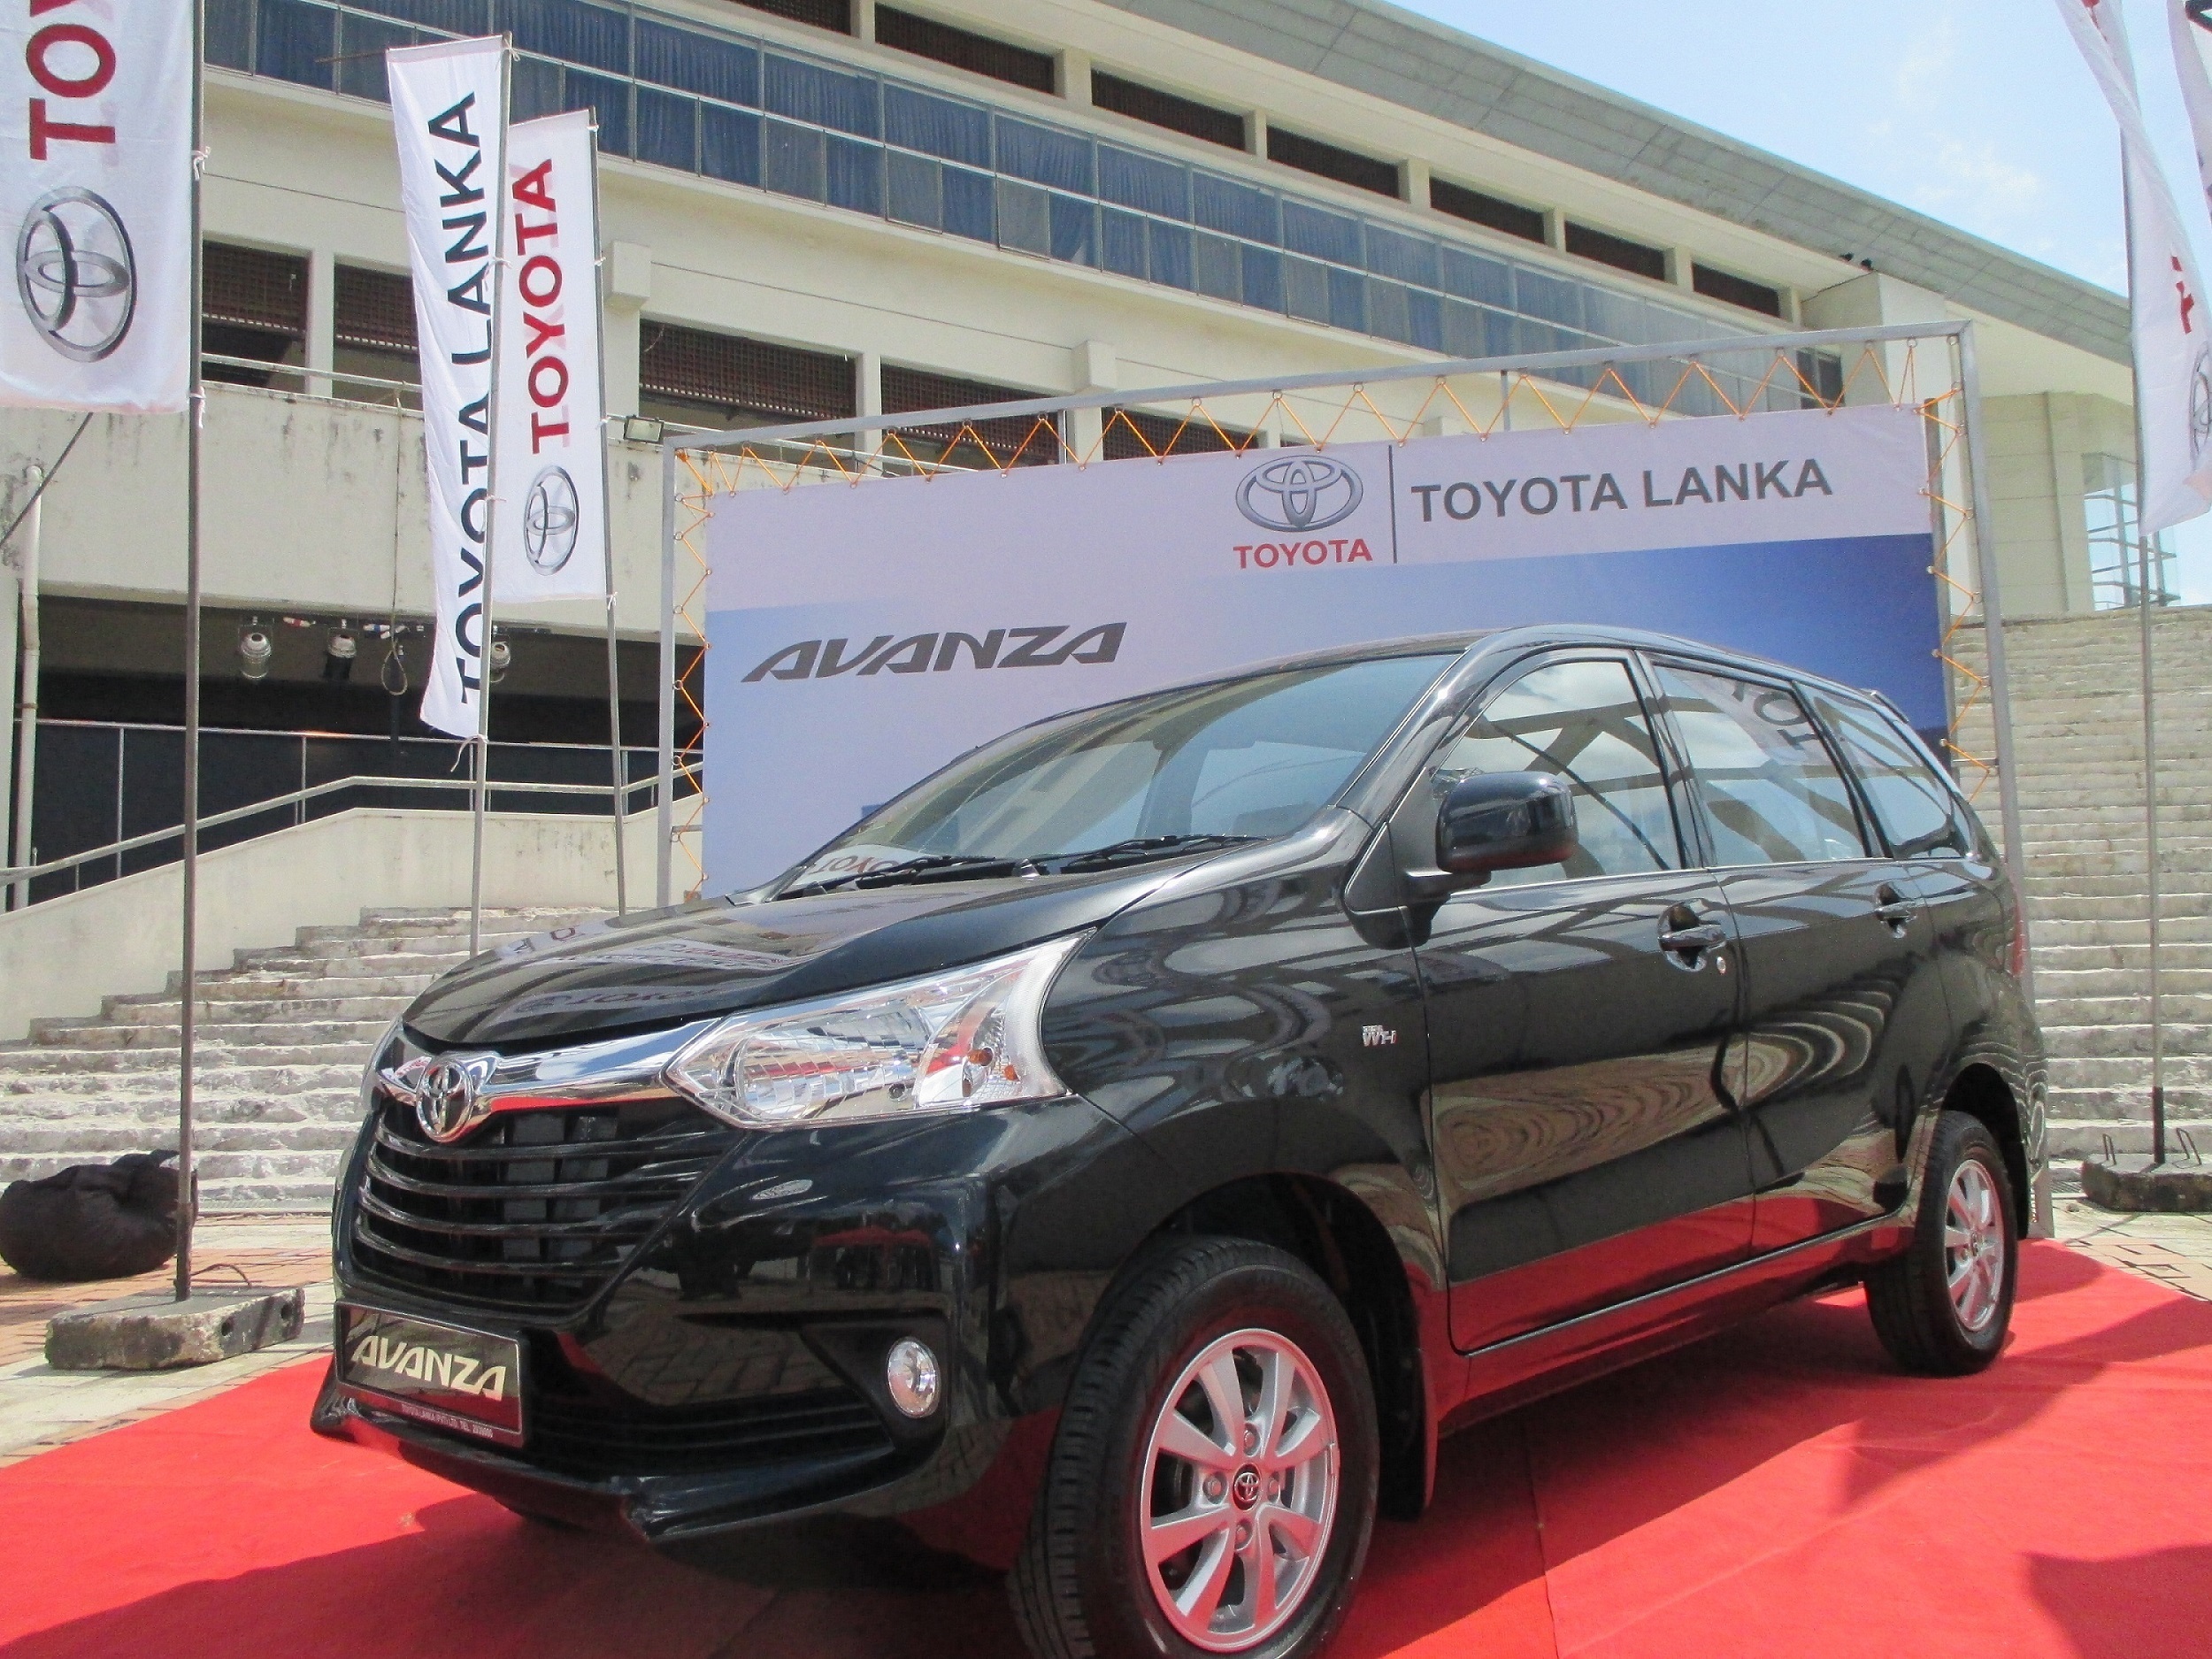 The Toyota Avanza for the 1st Runner-Up